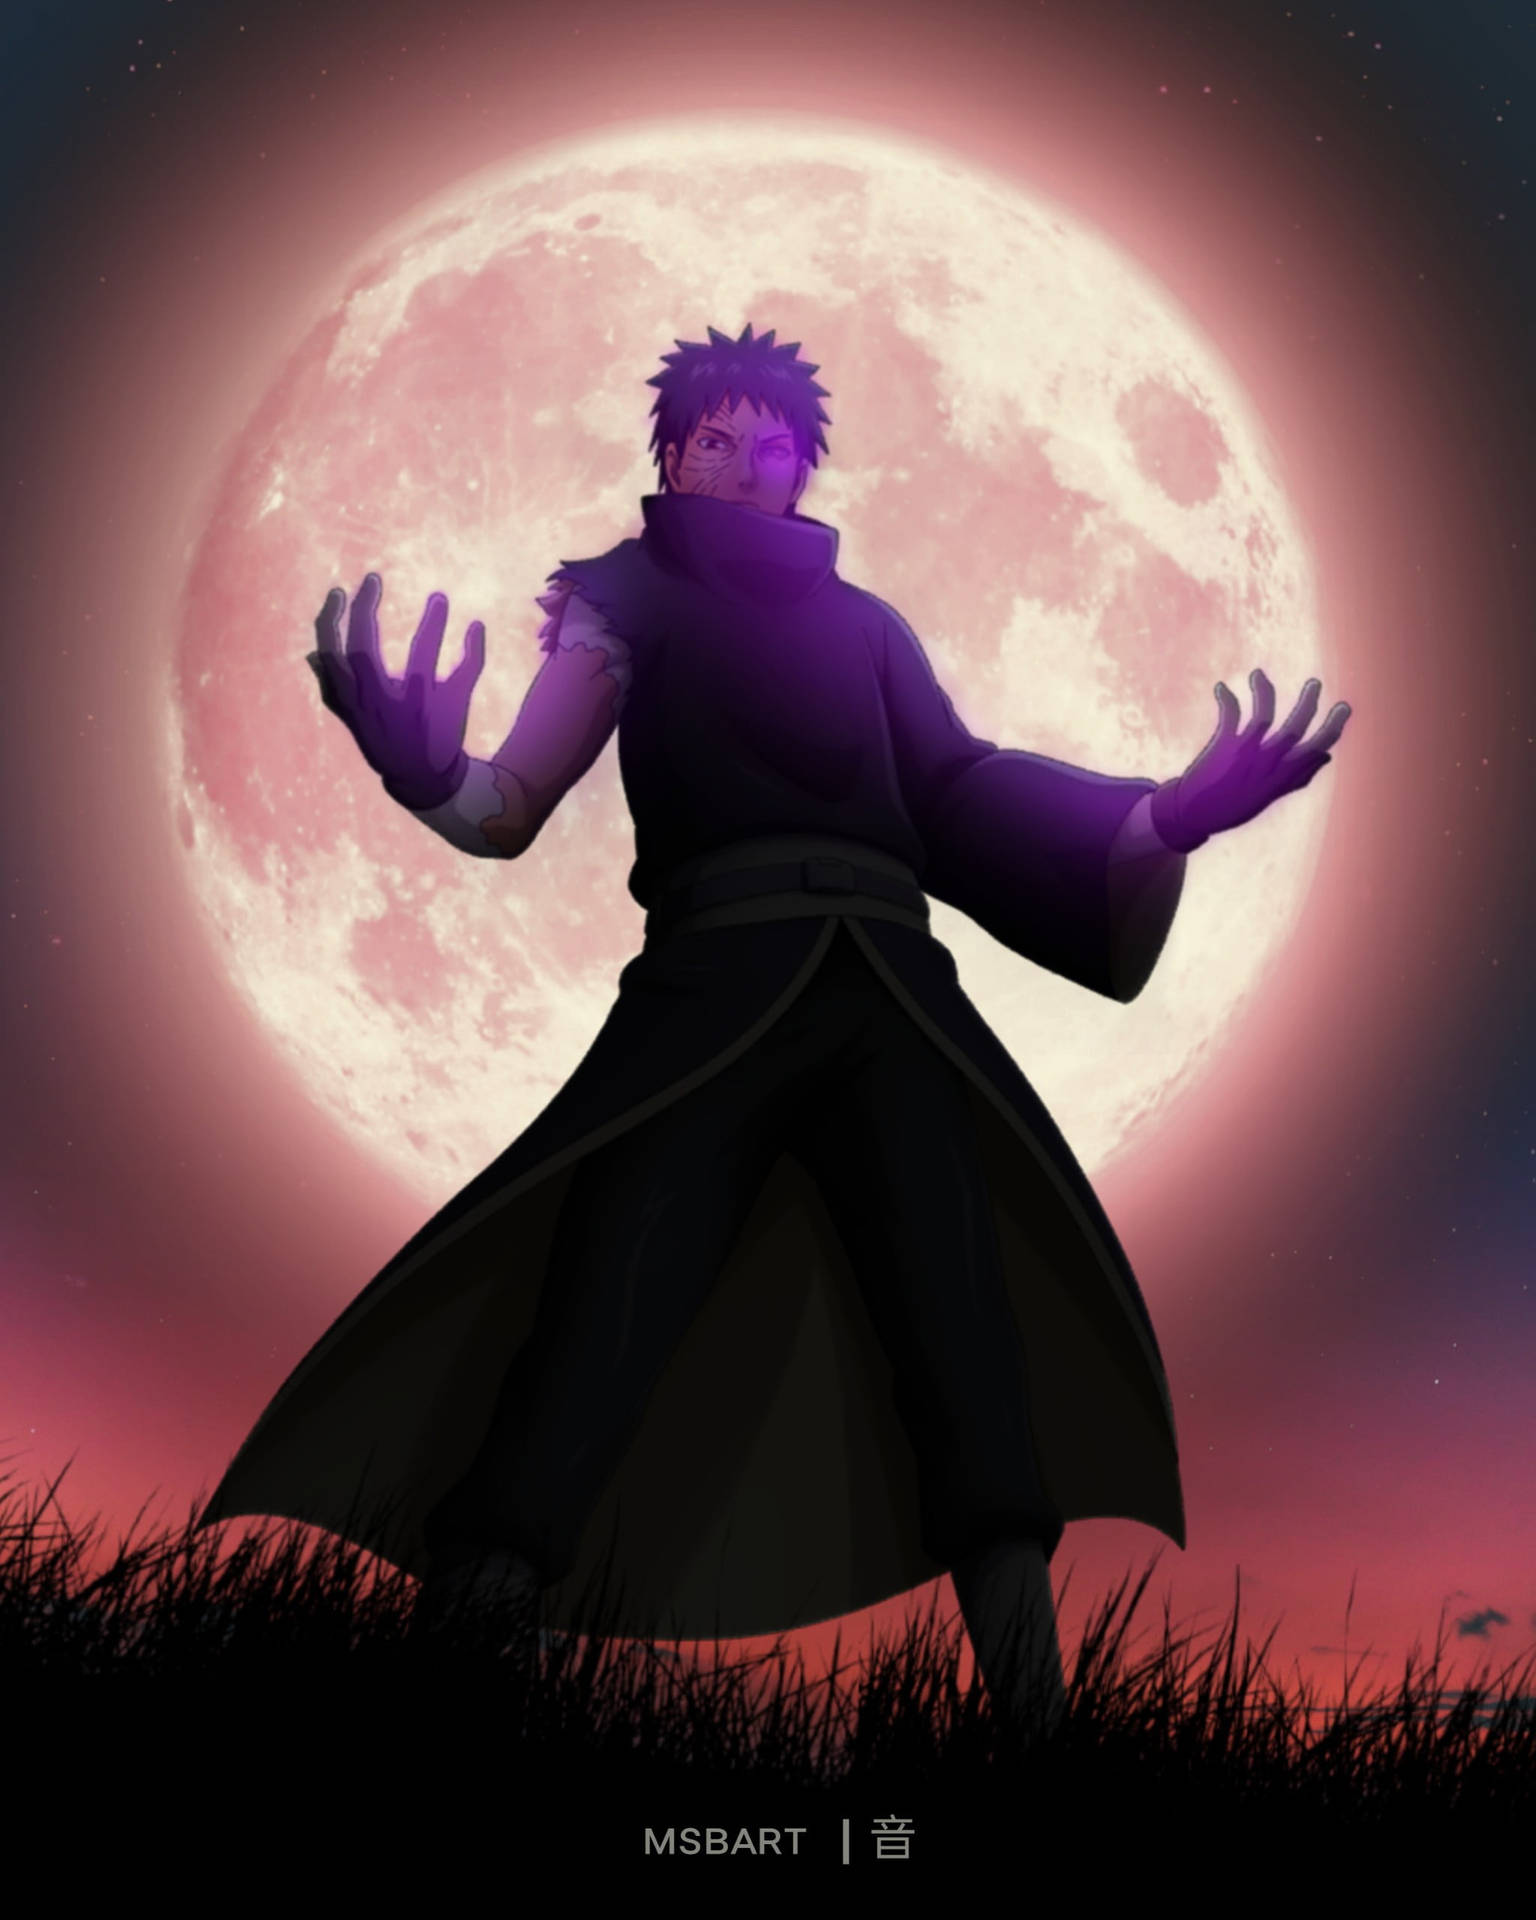 Obito Uchiha Wallpapers  Top 35 Best Obito Uchiha Backgrounds Download